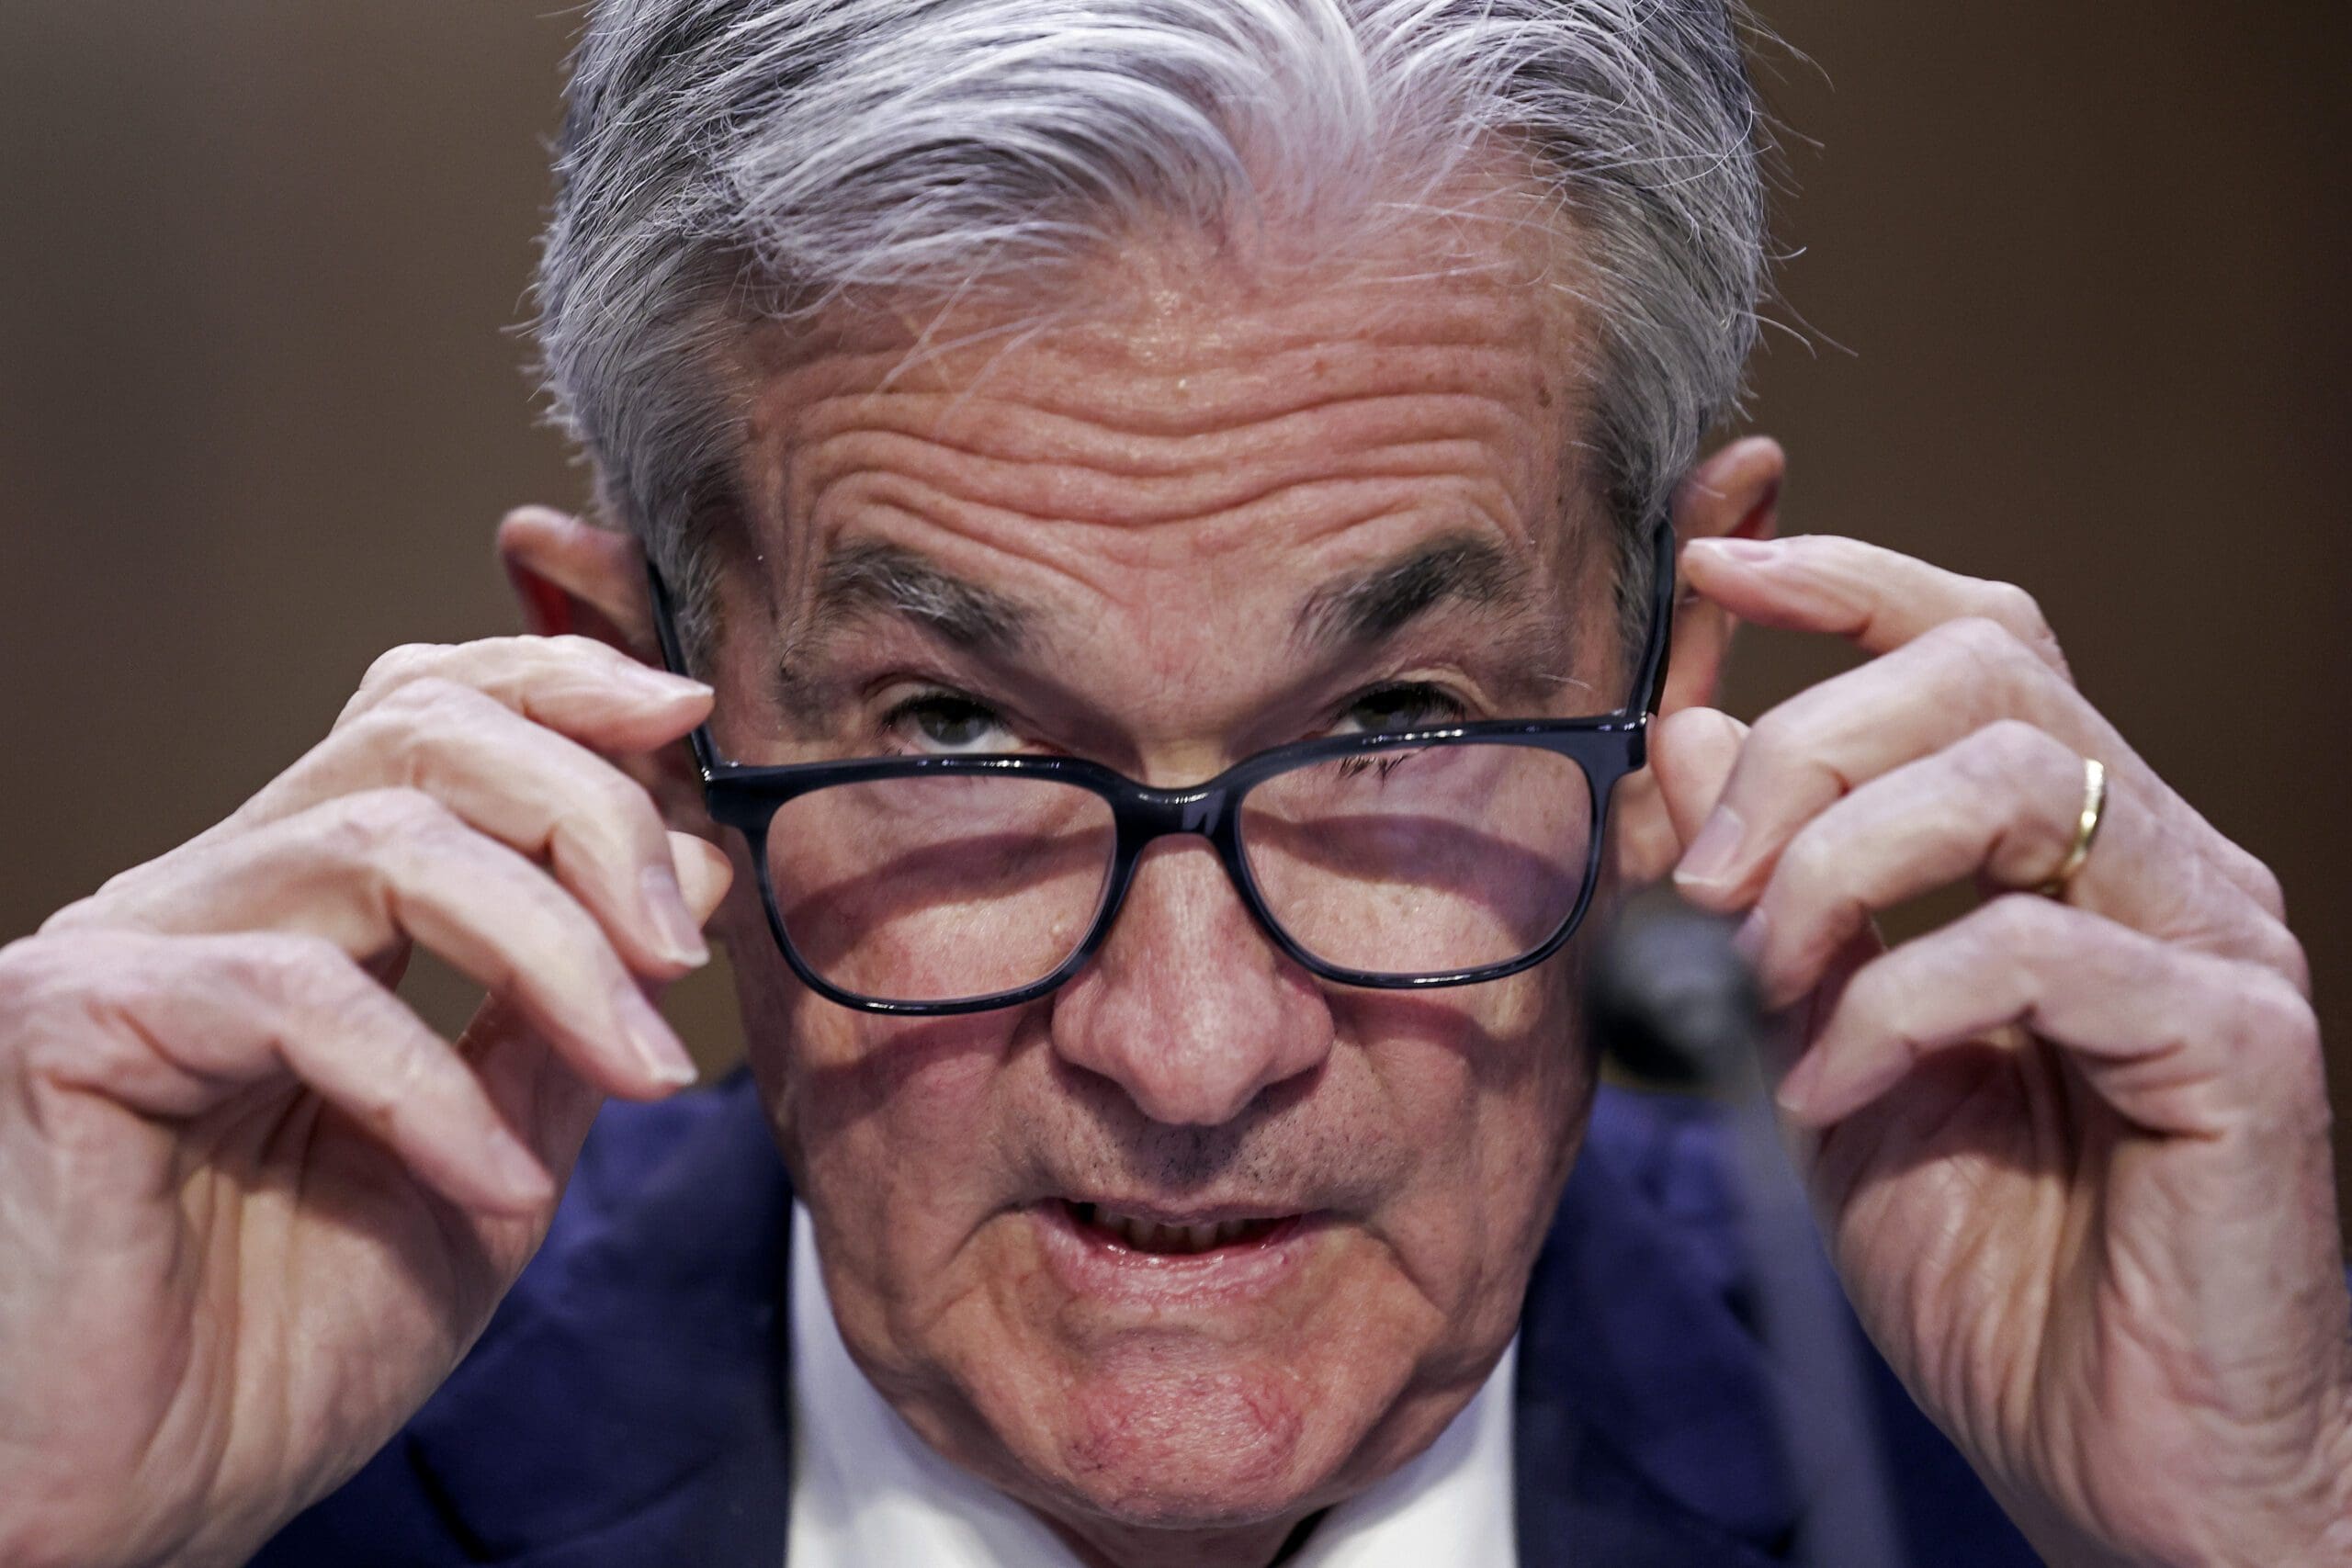 wall-street-bets-powell-will-flinch-on-rate-hikes-once-job-market-sours